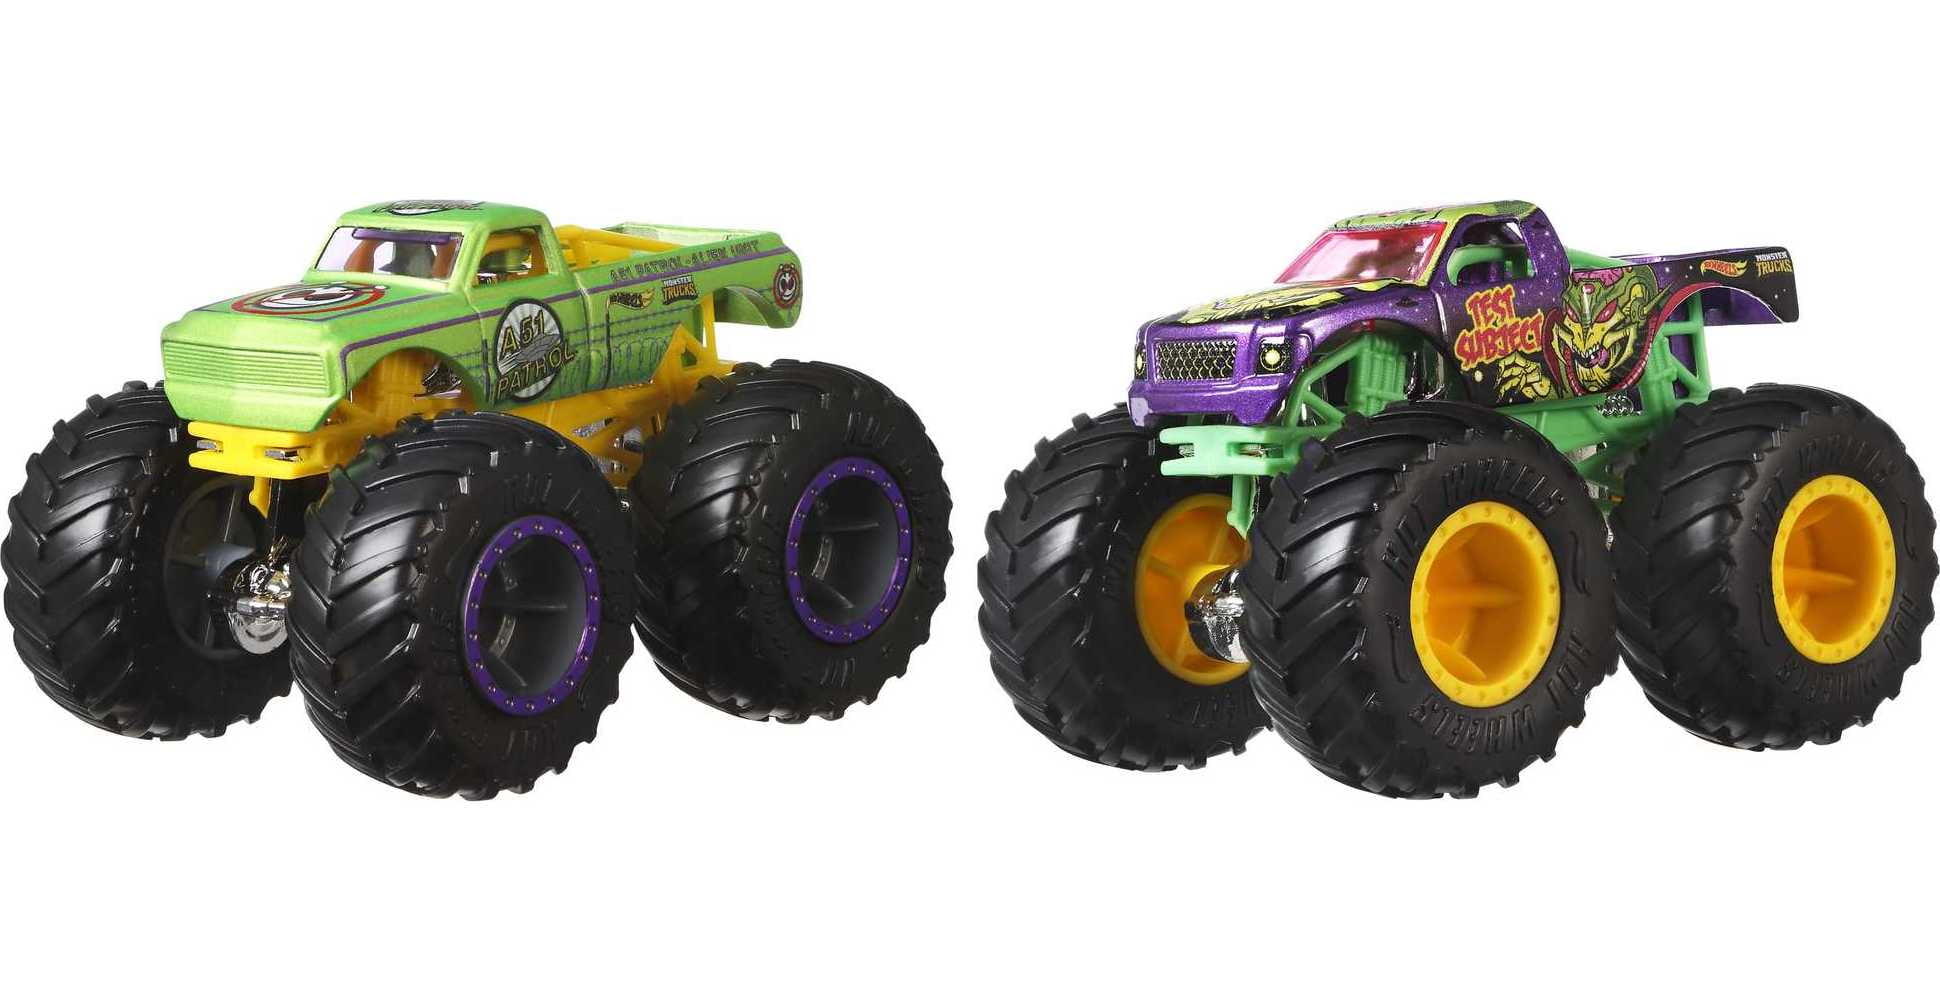 Hot Wheels Monster Trucks 1:64 Demo Doubles 2-pk Collection - The Toy Box  Hanover